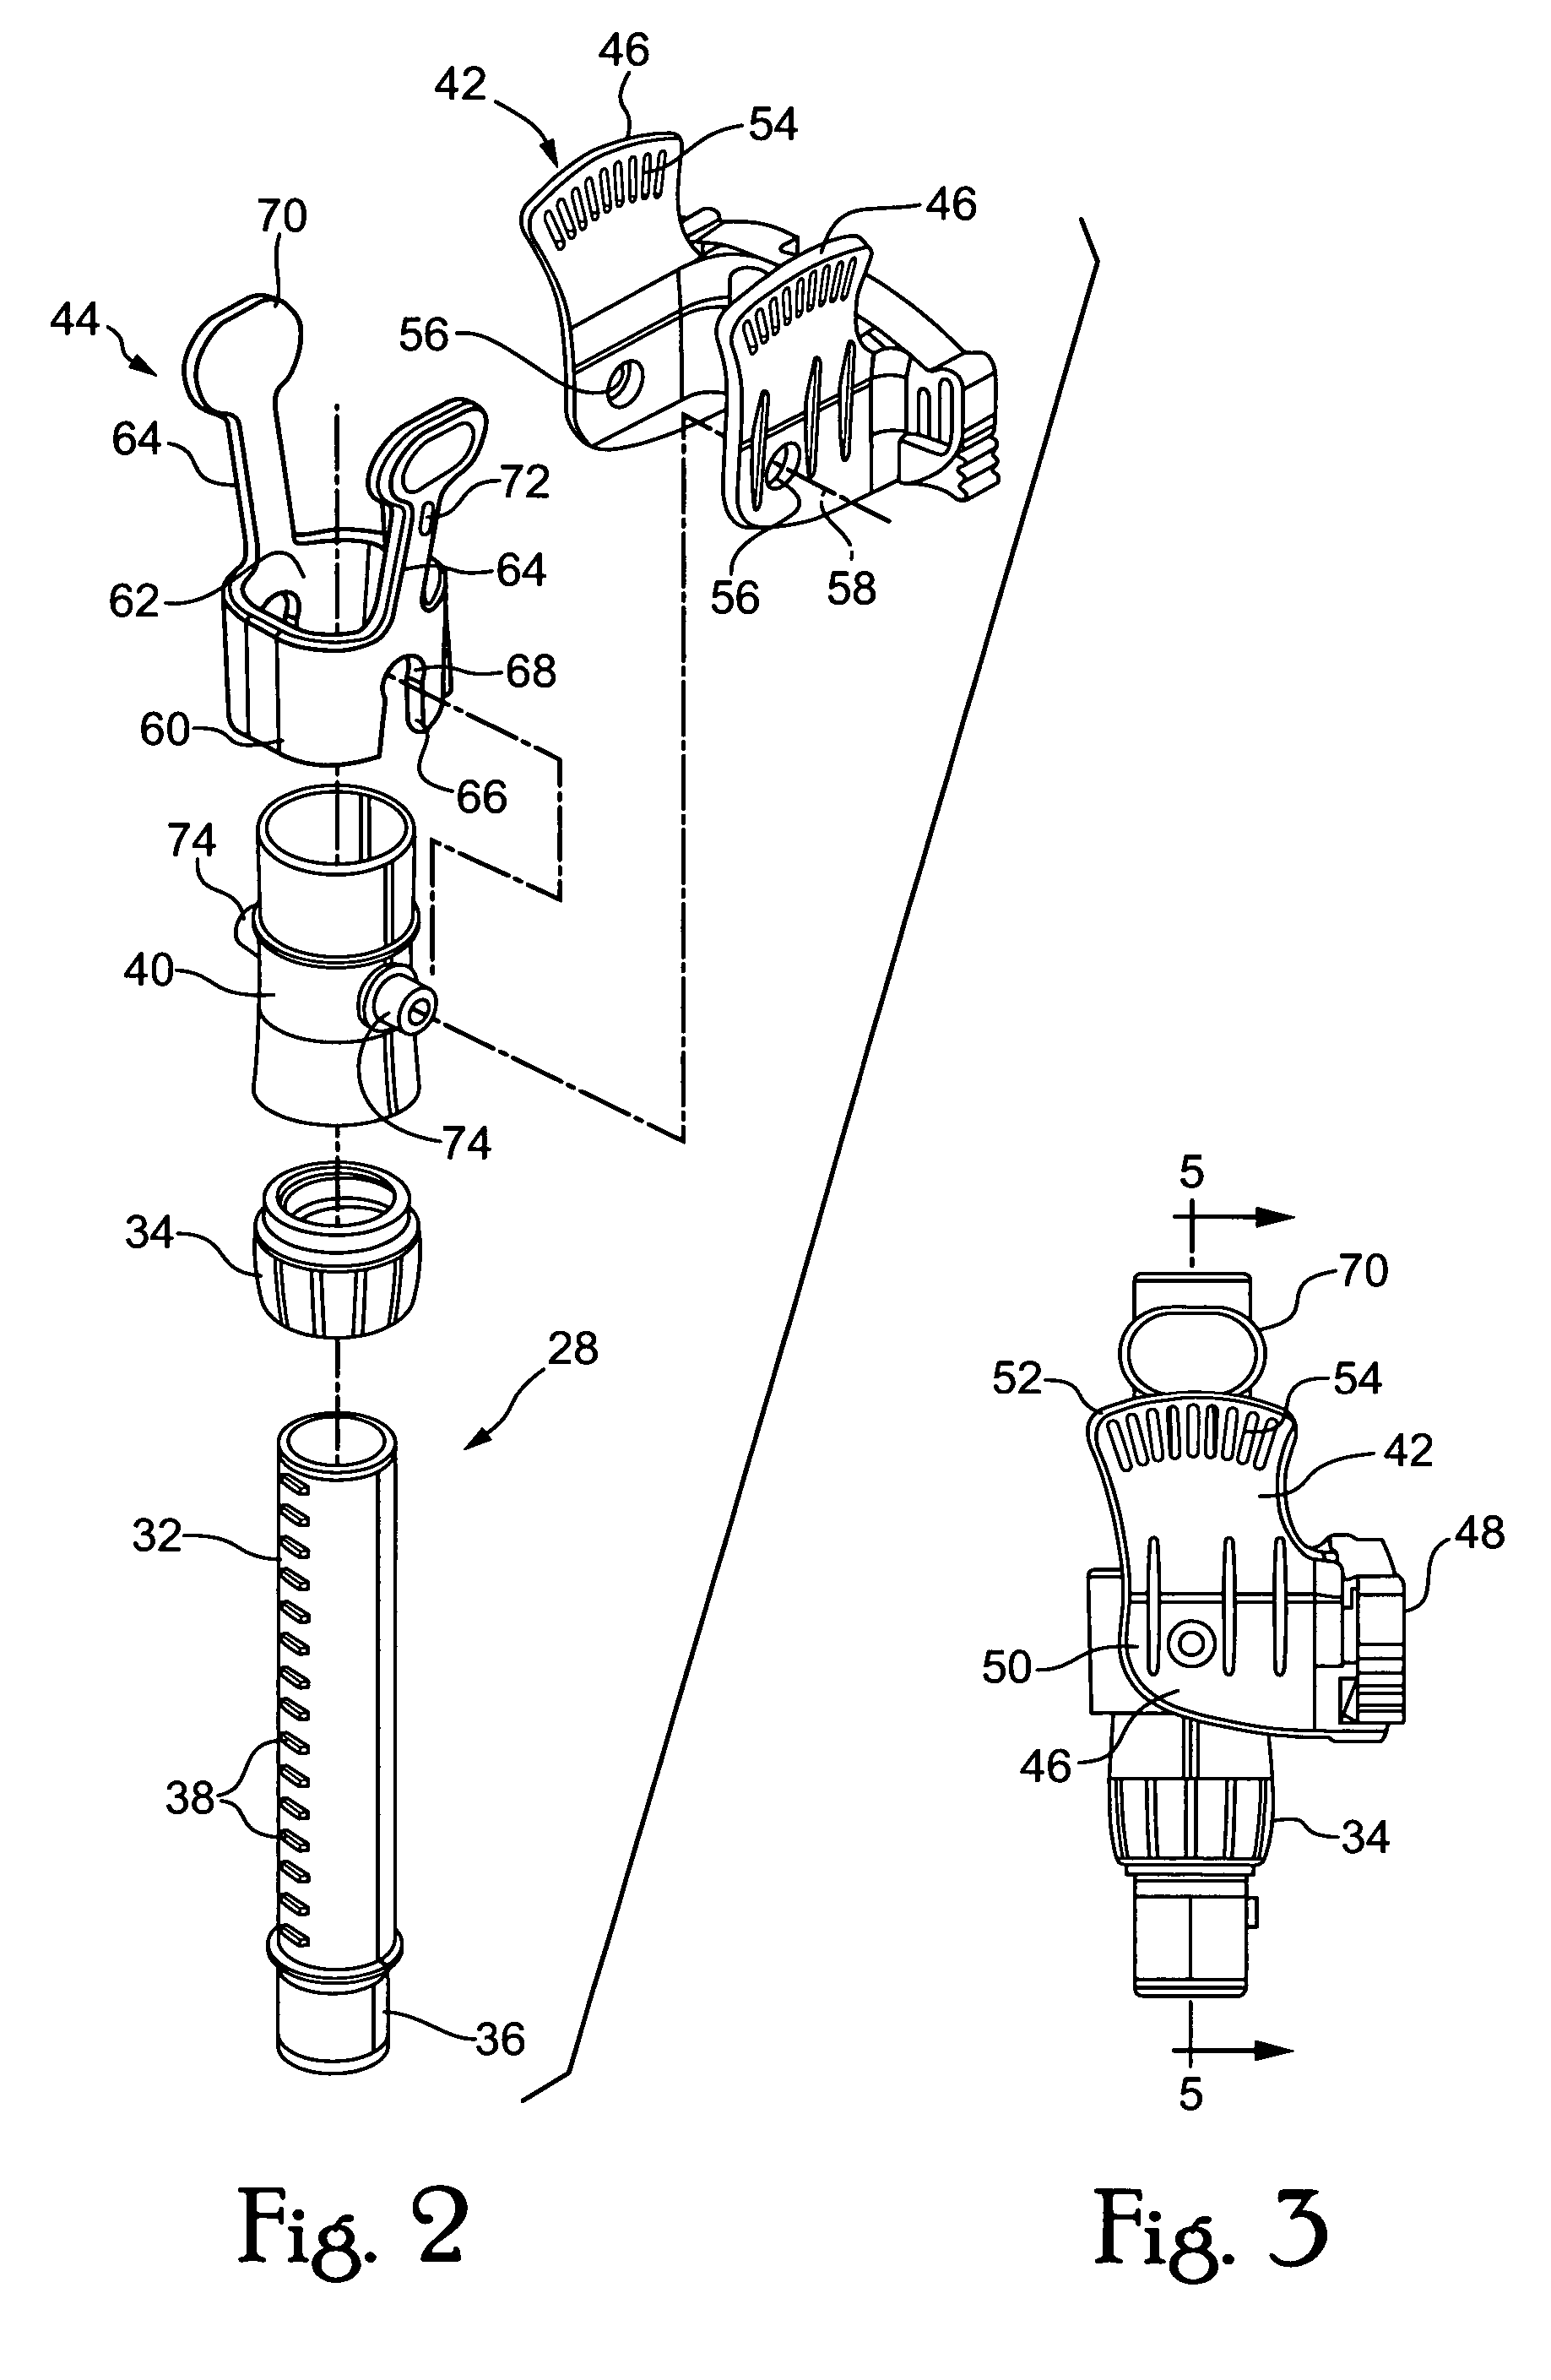 Headgear assembly for a respiratory support system